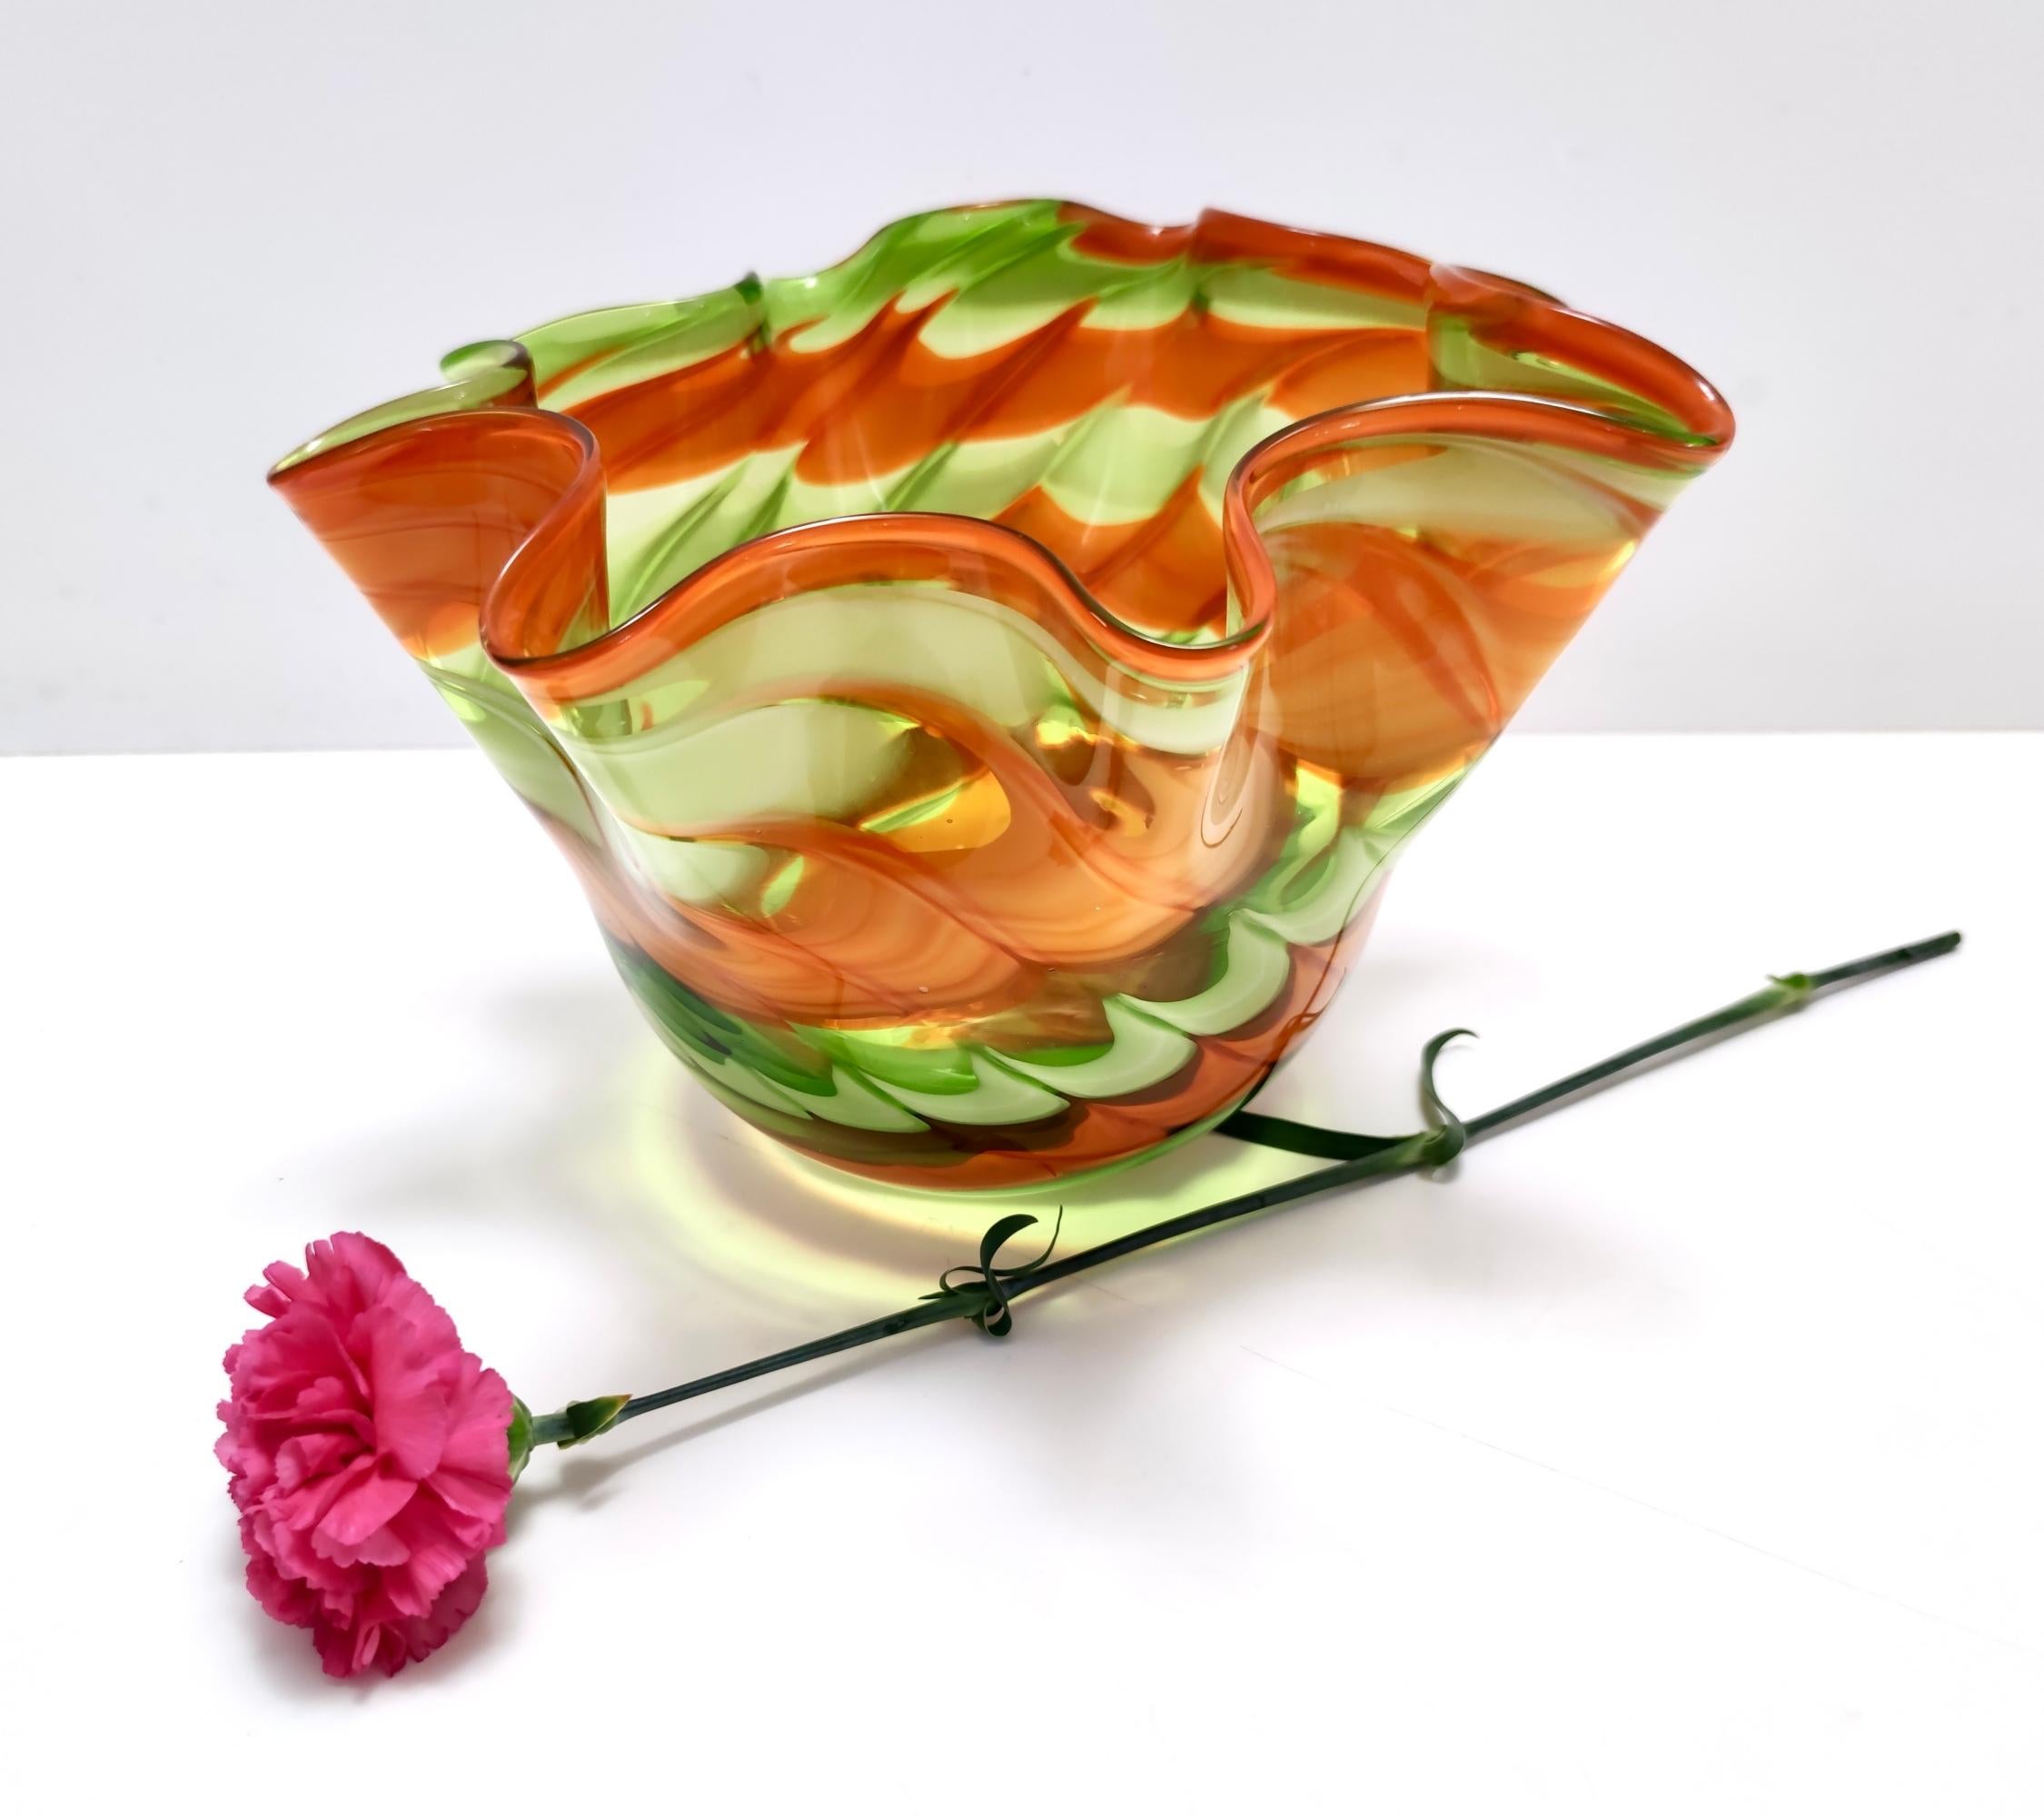 Made in Italy, 1980s. 
This is a Murano glass vase by Fratelli Toso with green and orange brush strokes.
It is a vintage piece, therefore it might show slight traces of use, but it can be considered as in perfect original condition and ready to